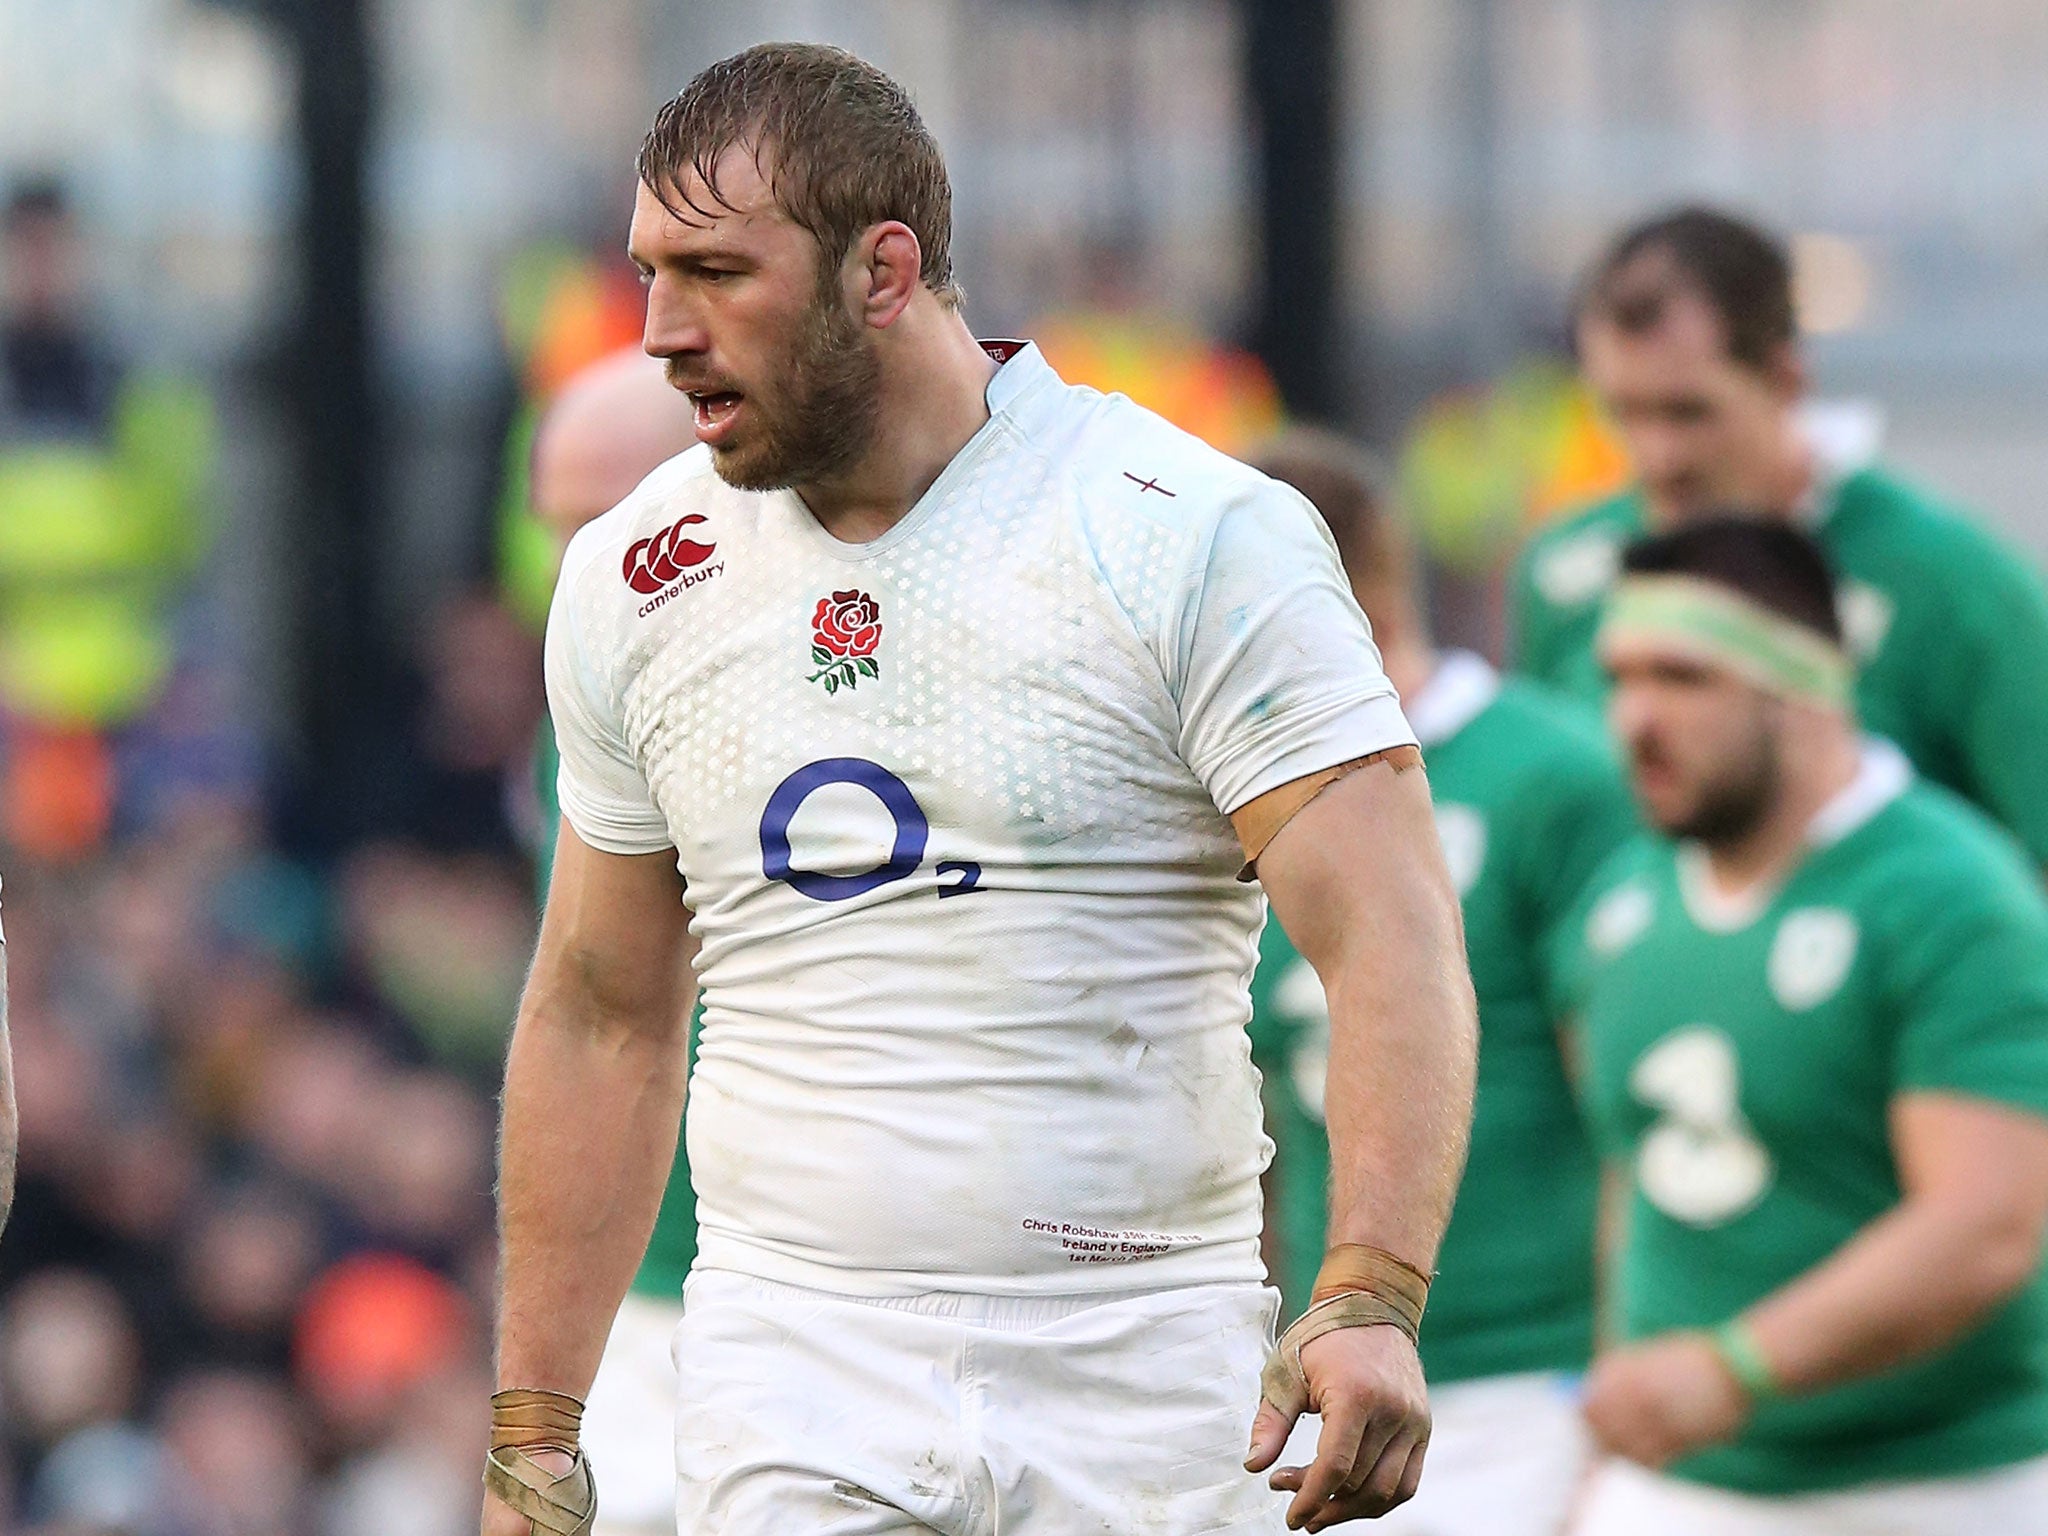 Chris Robshaw and England could do little to stop the Irish power